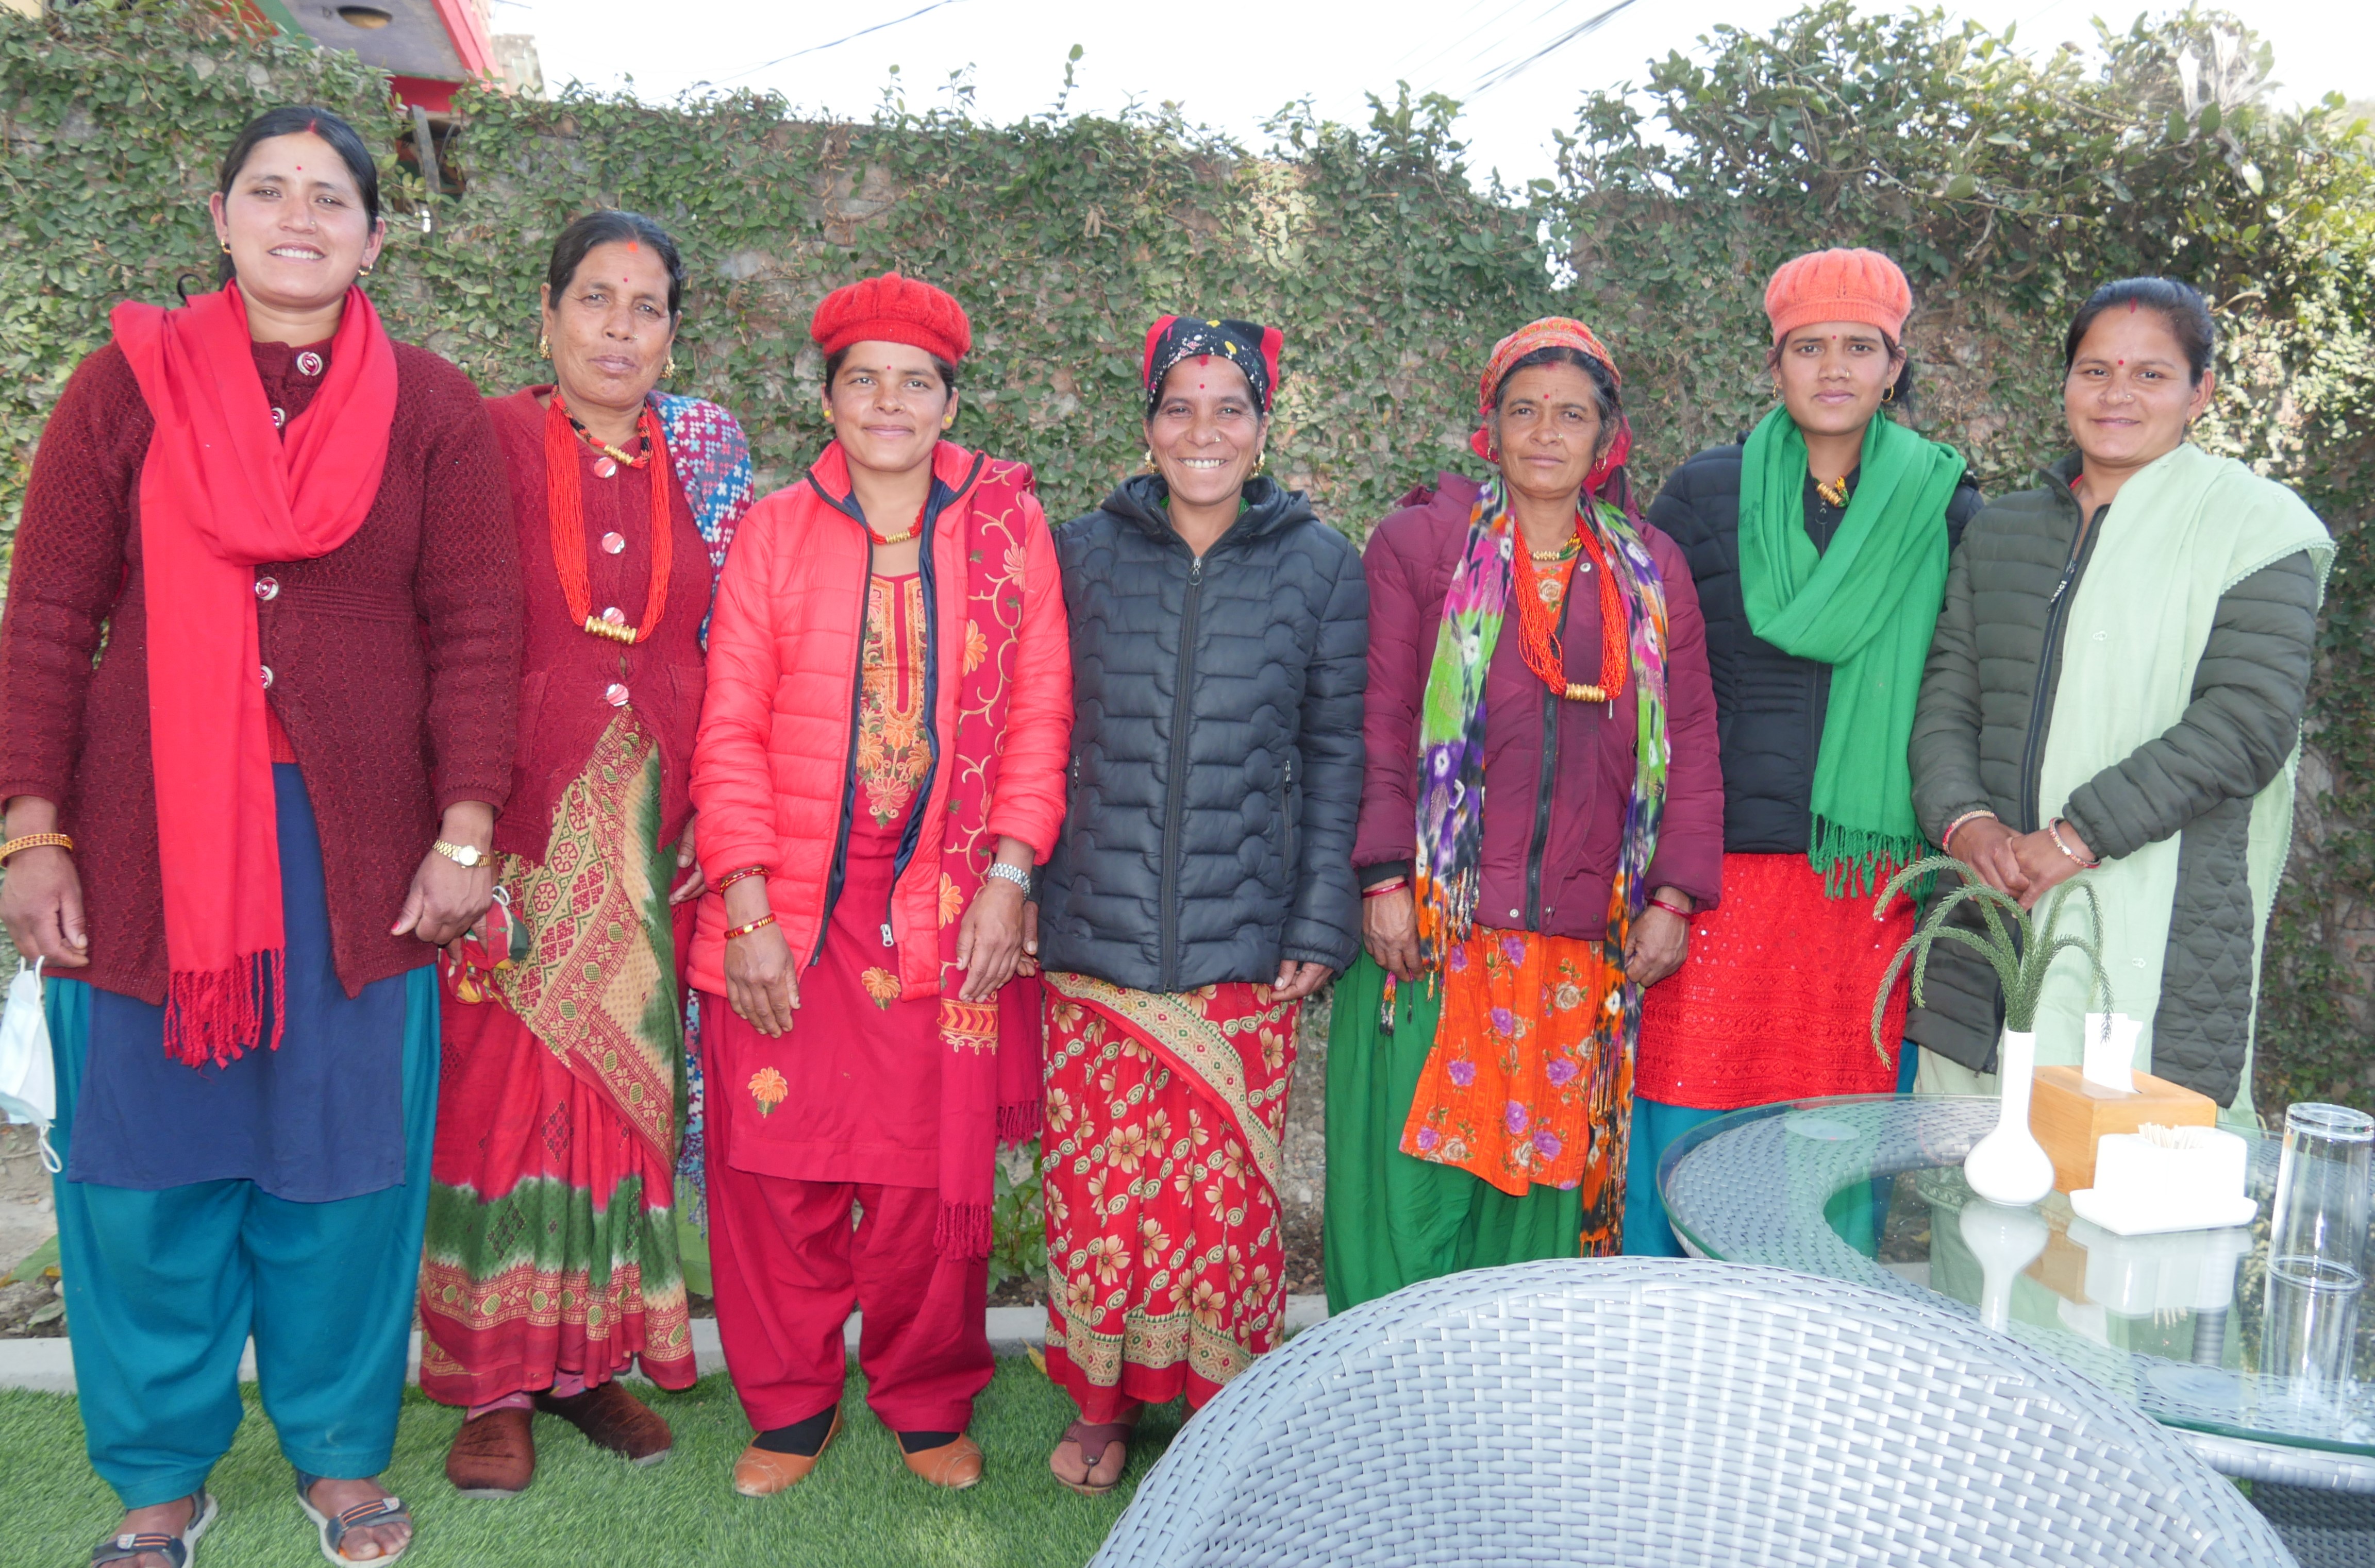 Female local government representatives of Shiwalaya Rural Municipality in Nepal posing after the programme.